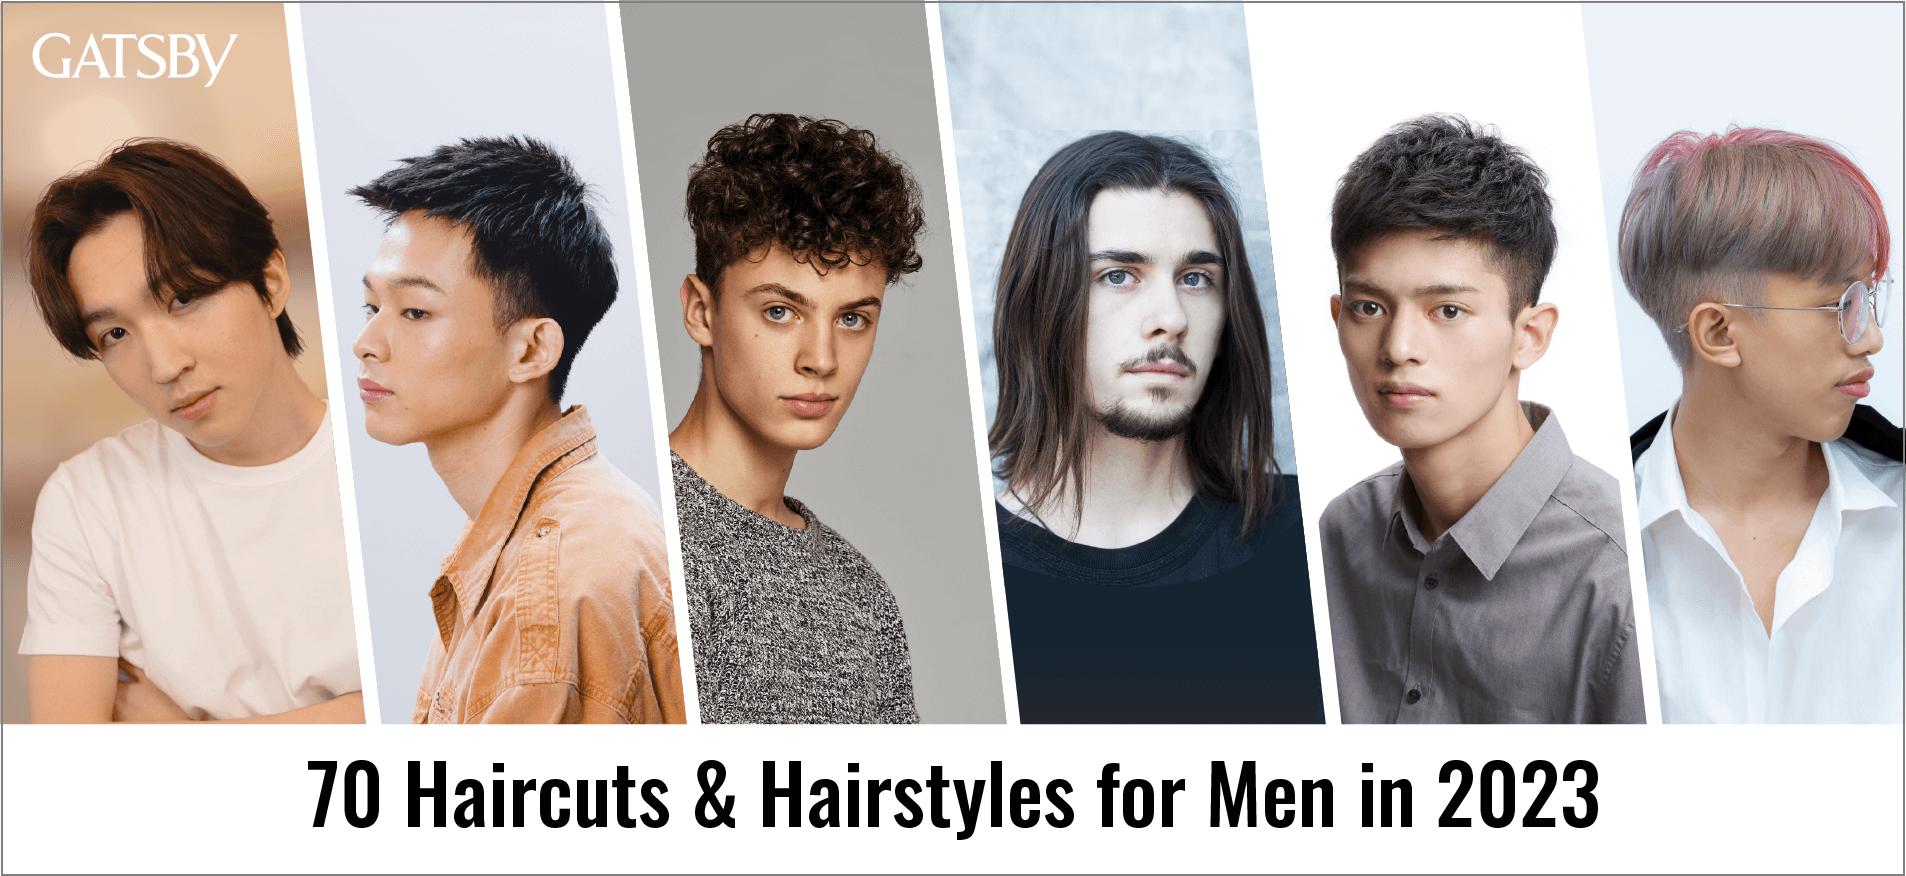 What's a good boy's hairstyle for school? | Men's Grooming Ireland